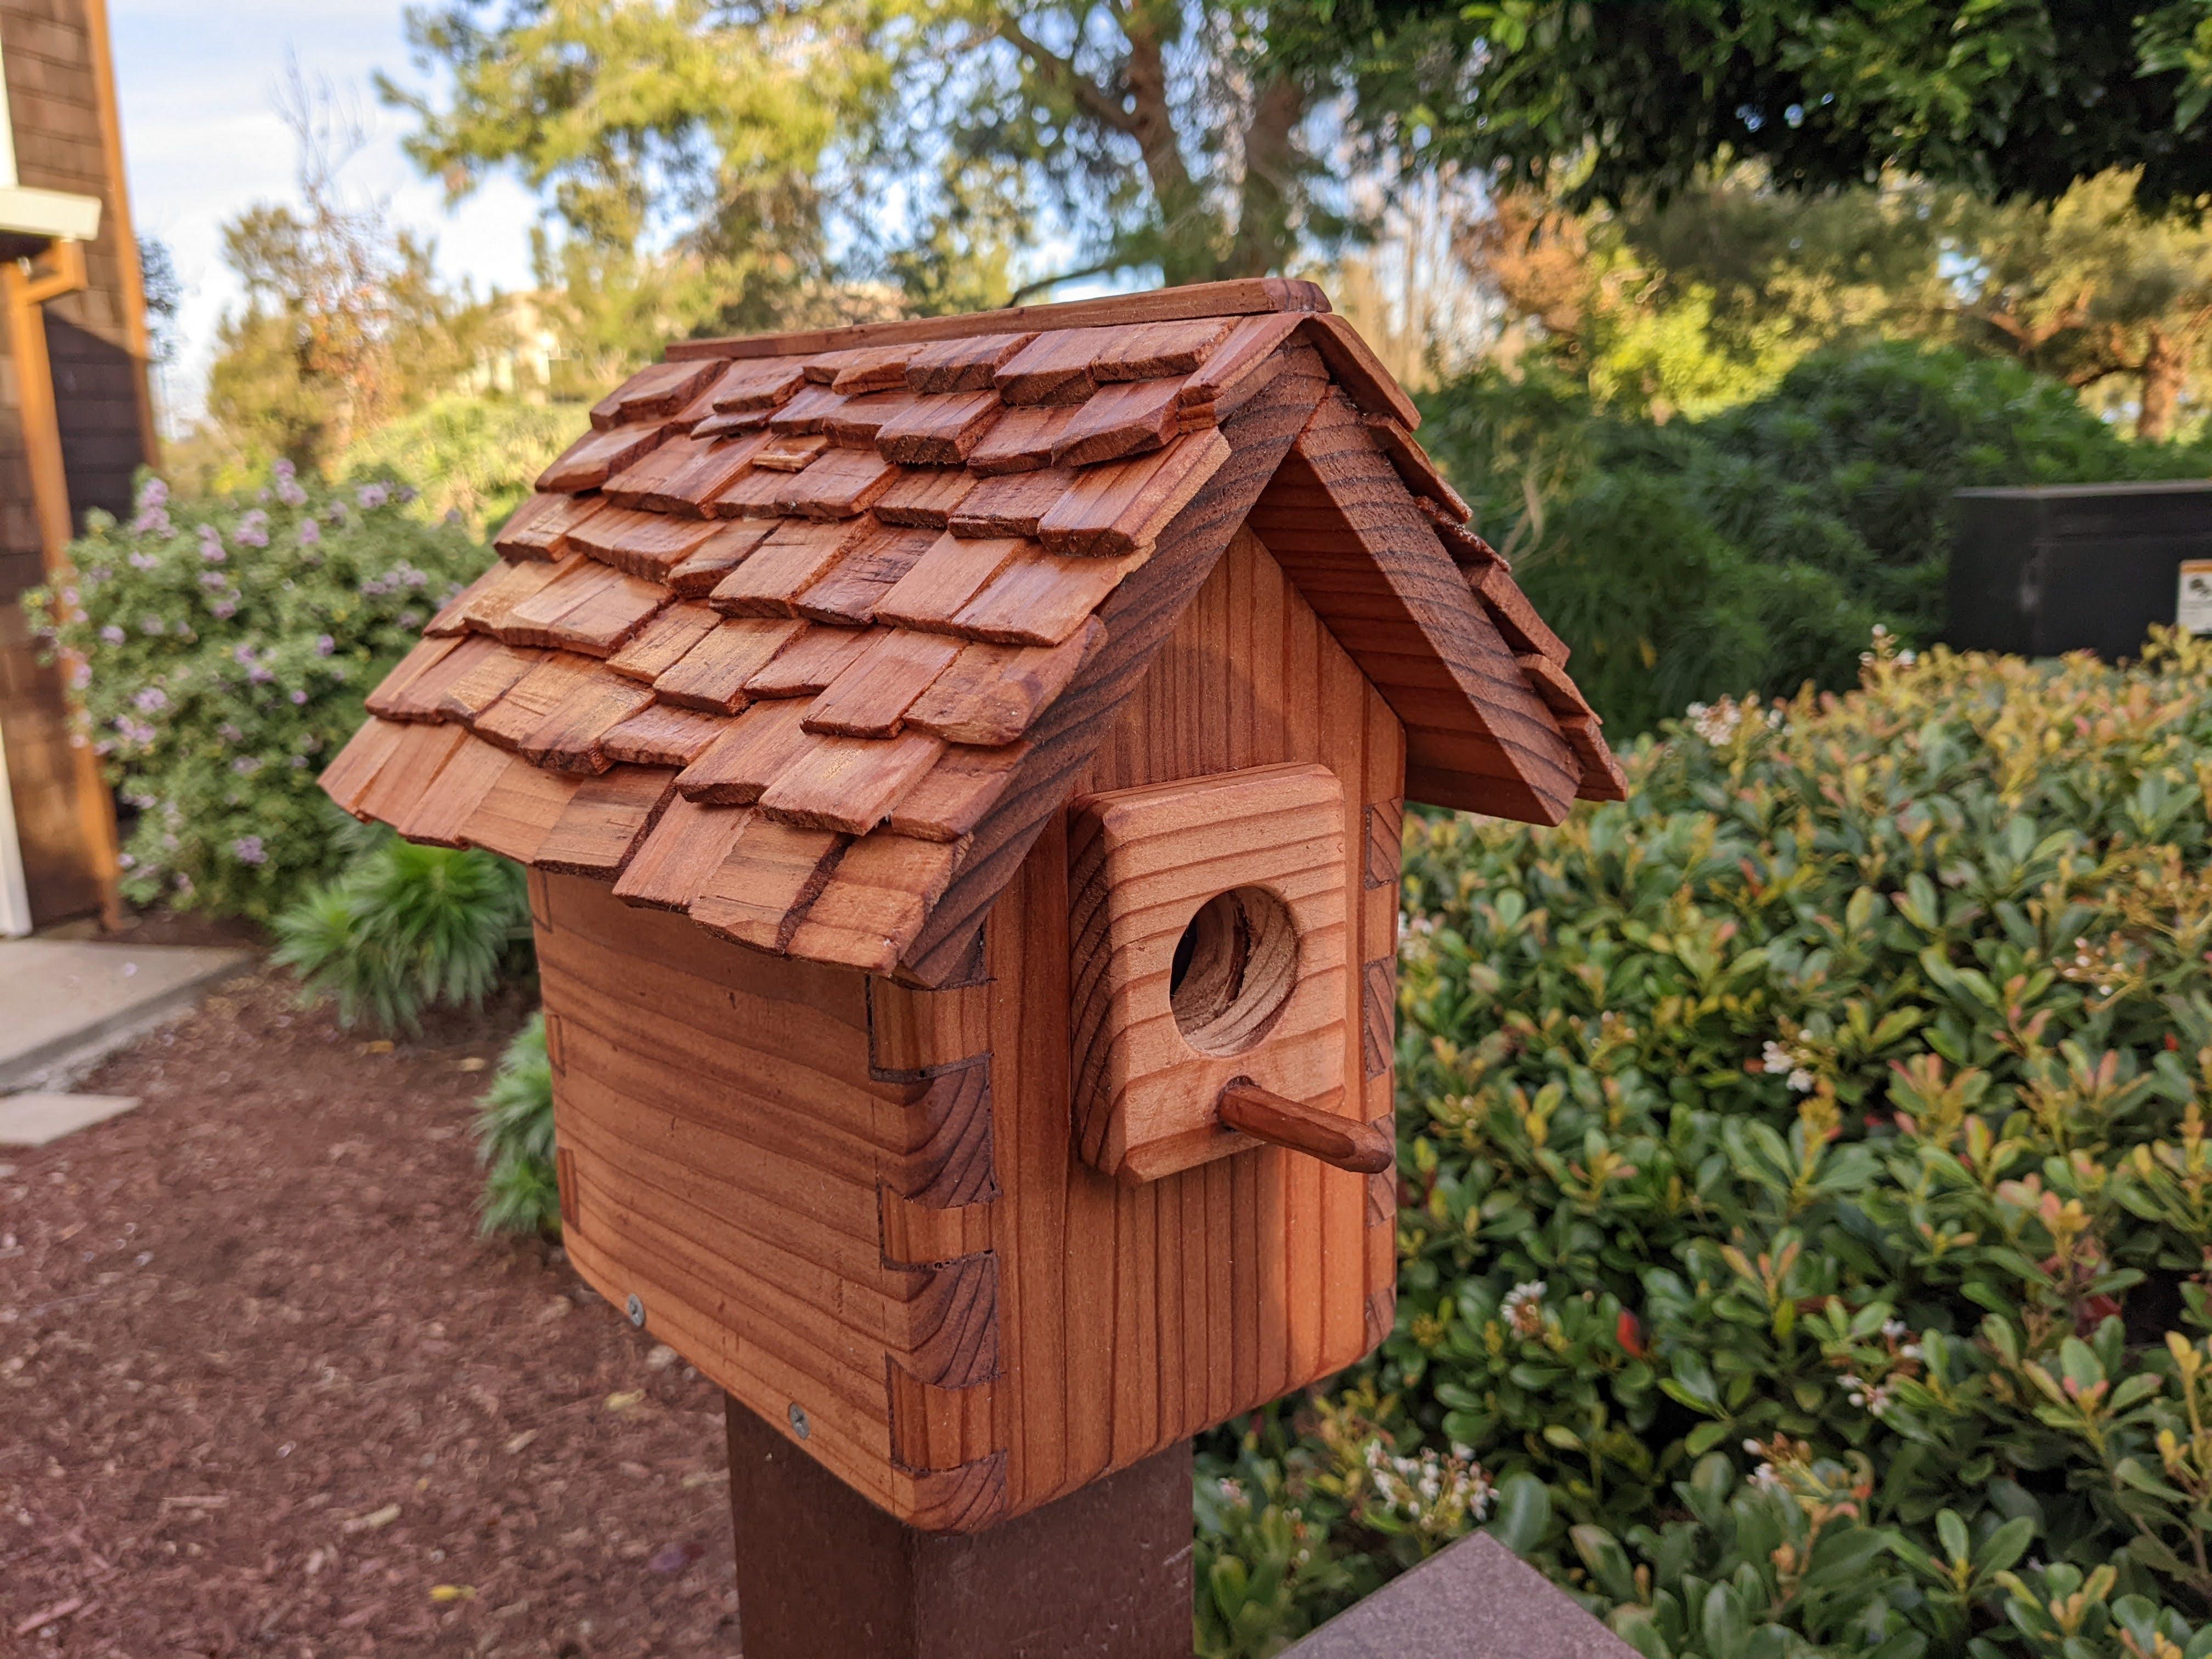 Entire Dovetailed Birdhouse From One Board